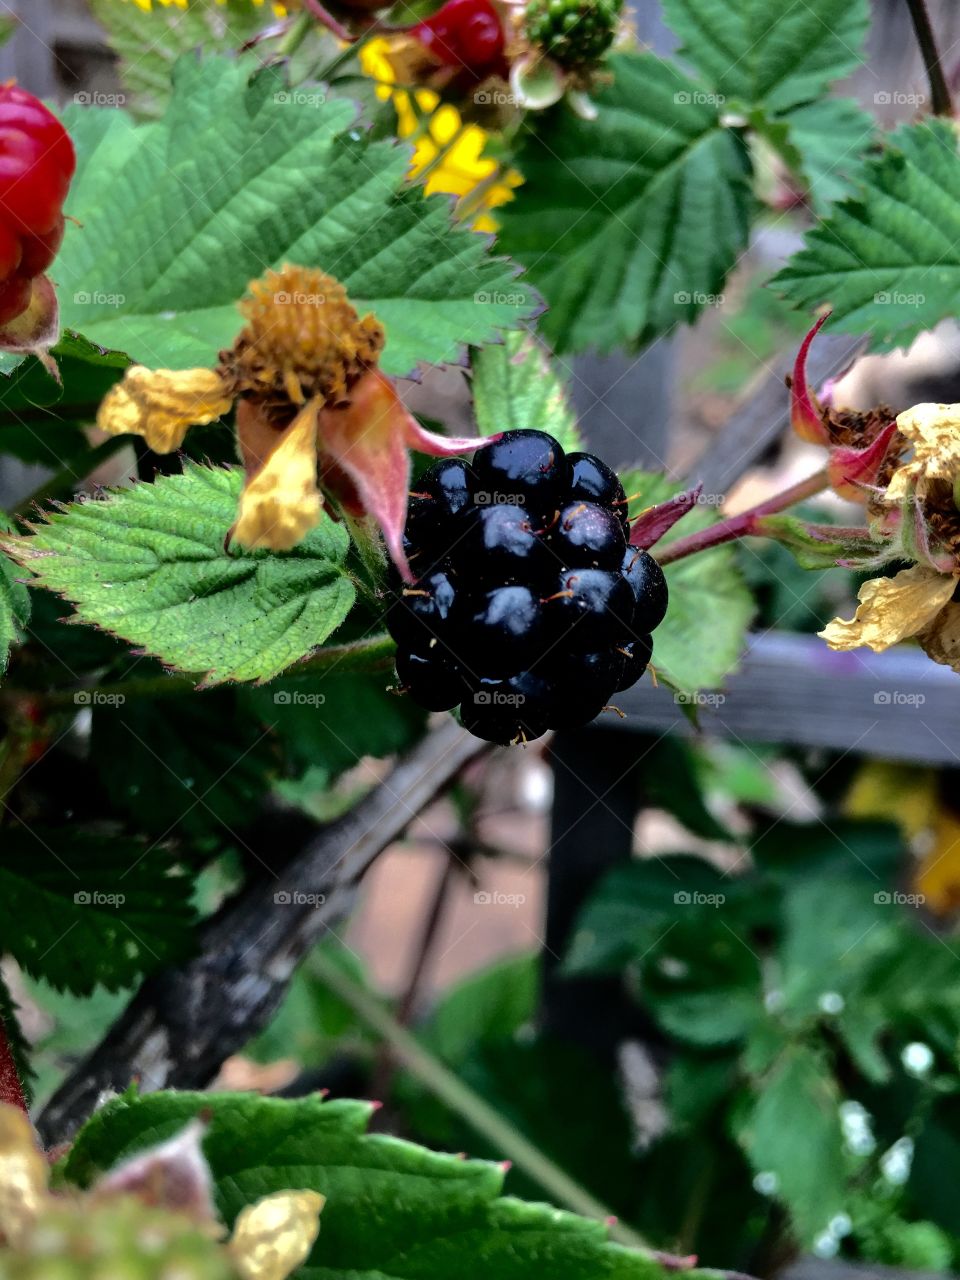 A juicy, homegrown blackberry is the first to ripen in the early summer season, adding a sprinkling of deep purple to the green leaves of the plant. 